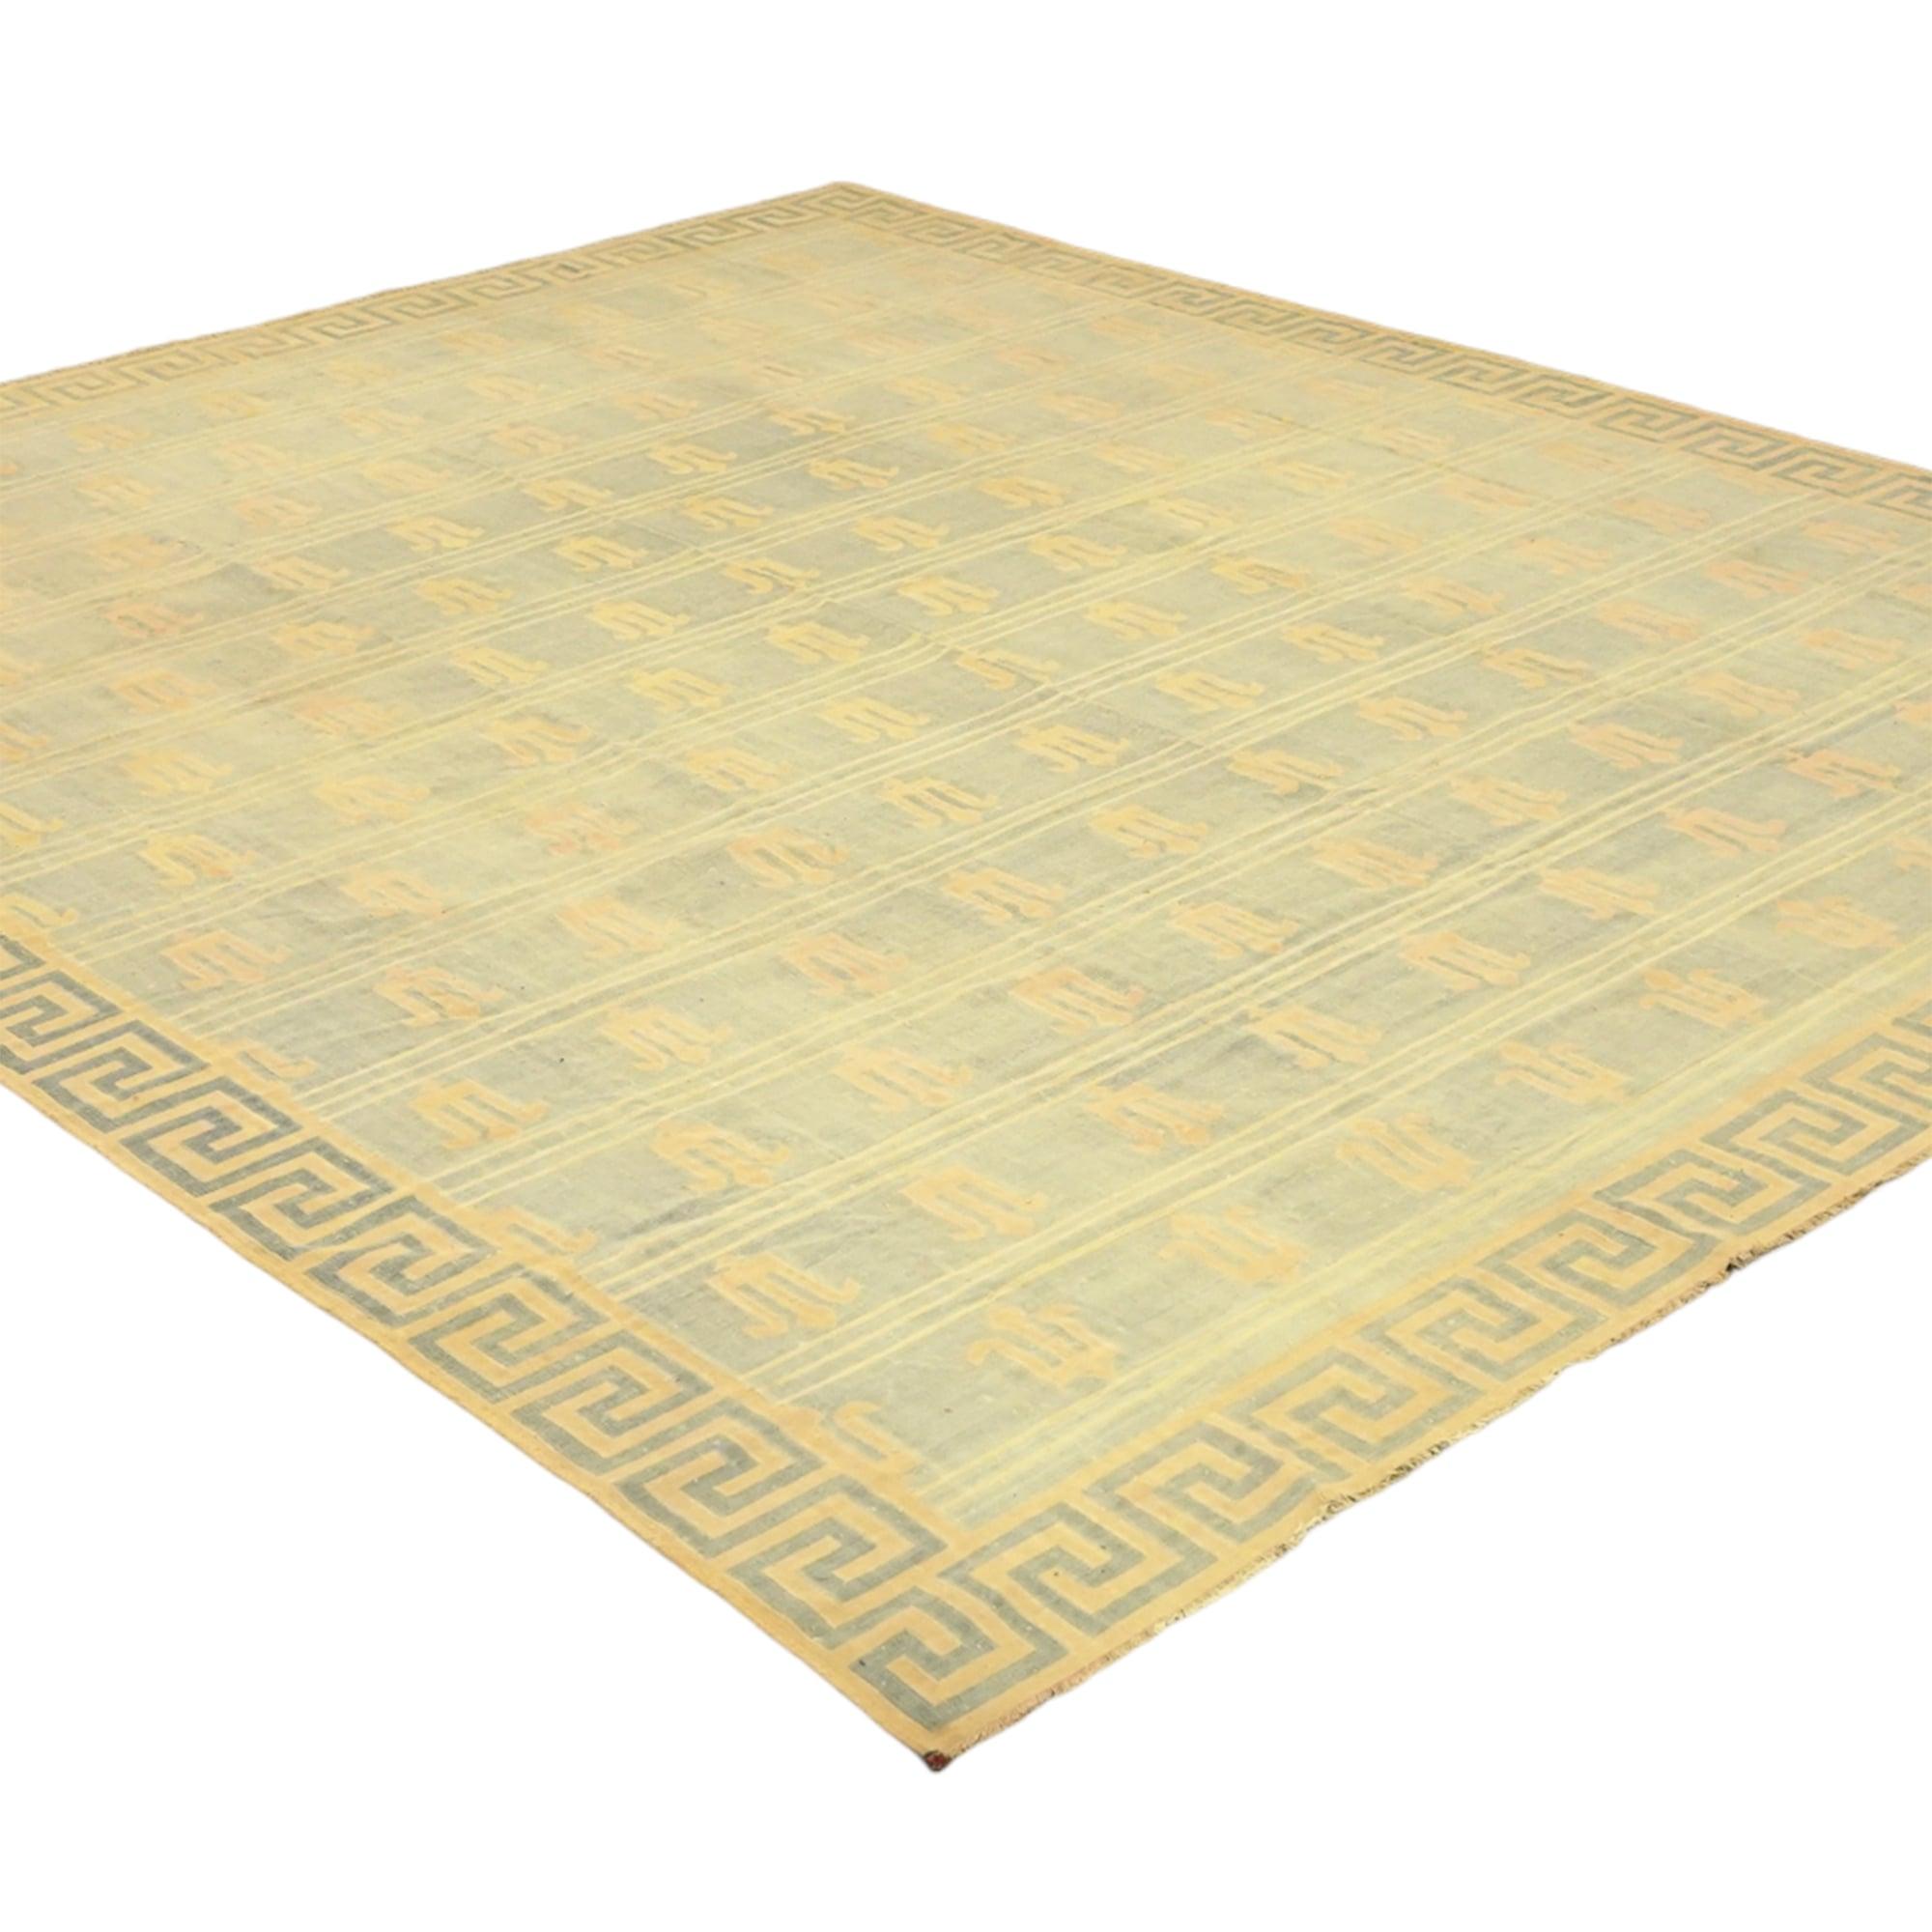 This vintage 13x14 Dhurrie flat weave is an exciting new entry in our esteemed collection. Handwoven in wool, it originates from India circa 1950-1960. 

On the Design: 

From our exclusive collection of vintage flatweaves, a masterpiece